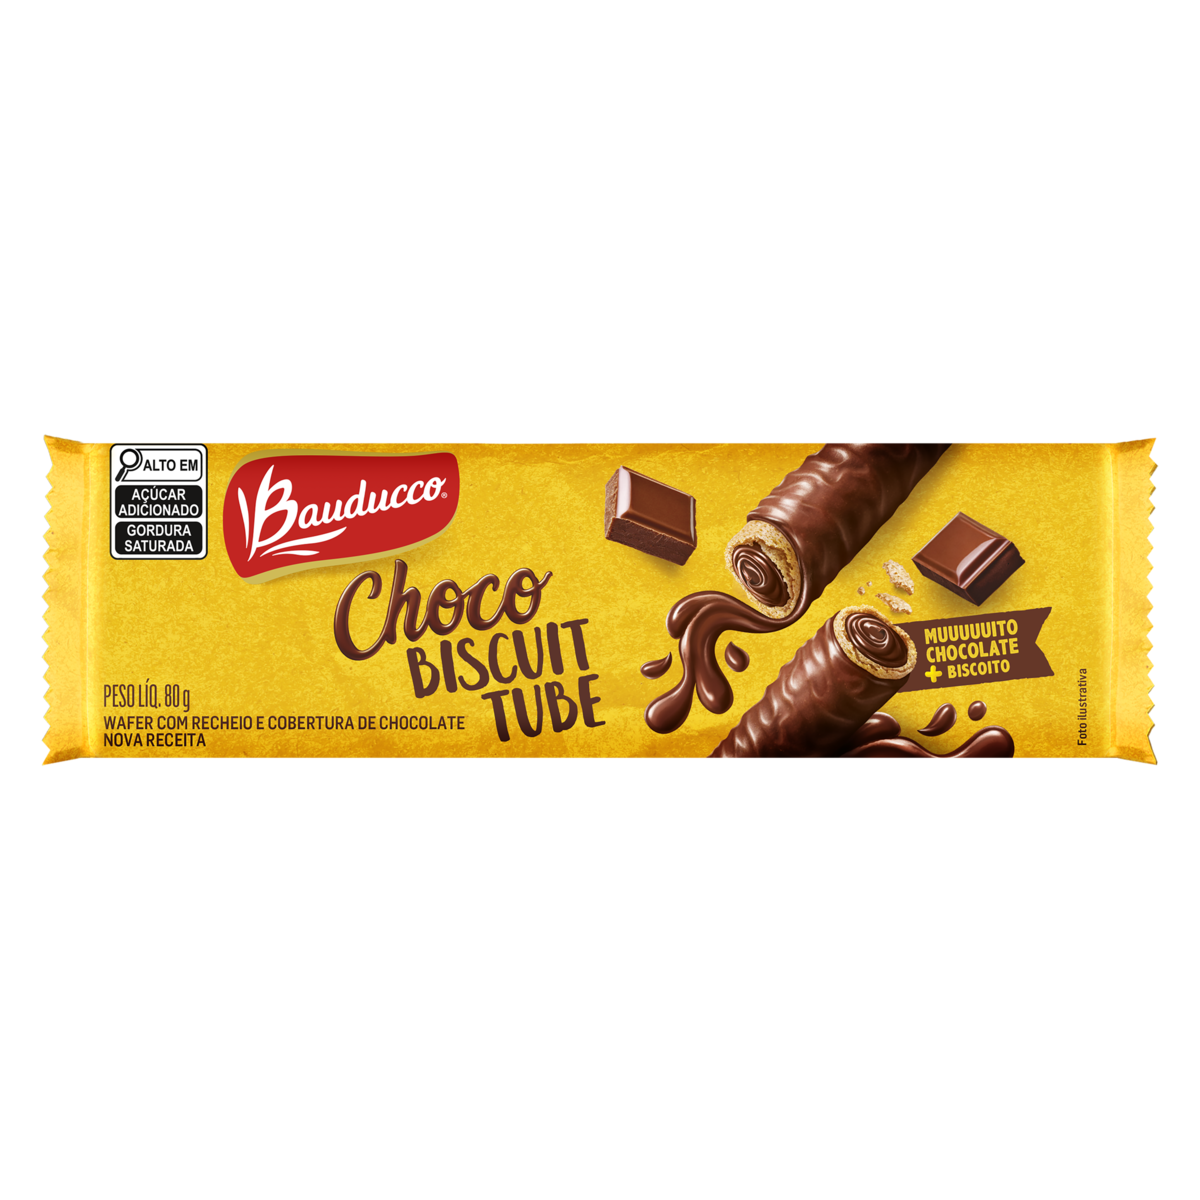 7891962069043 - WAFER BAUDUCCO CHOCO BISCUIT TUBE PACOTE 80G